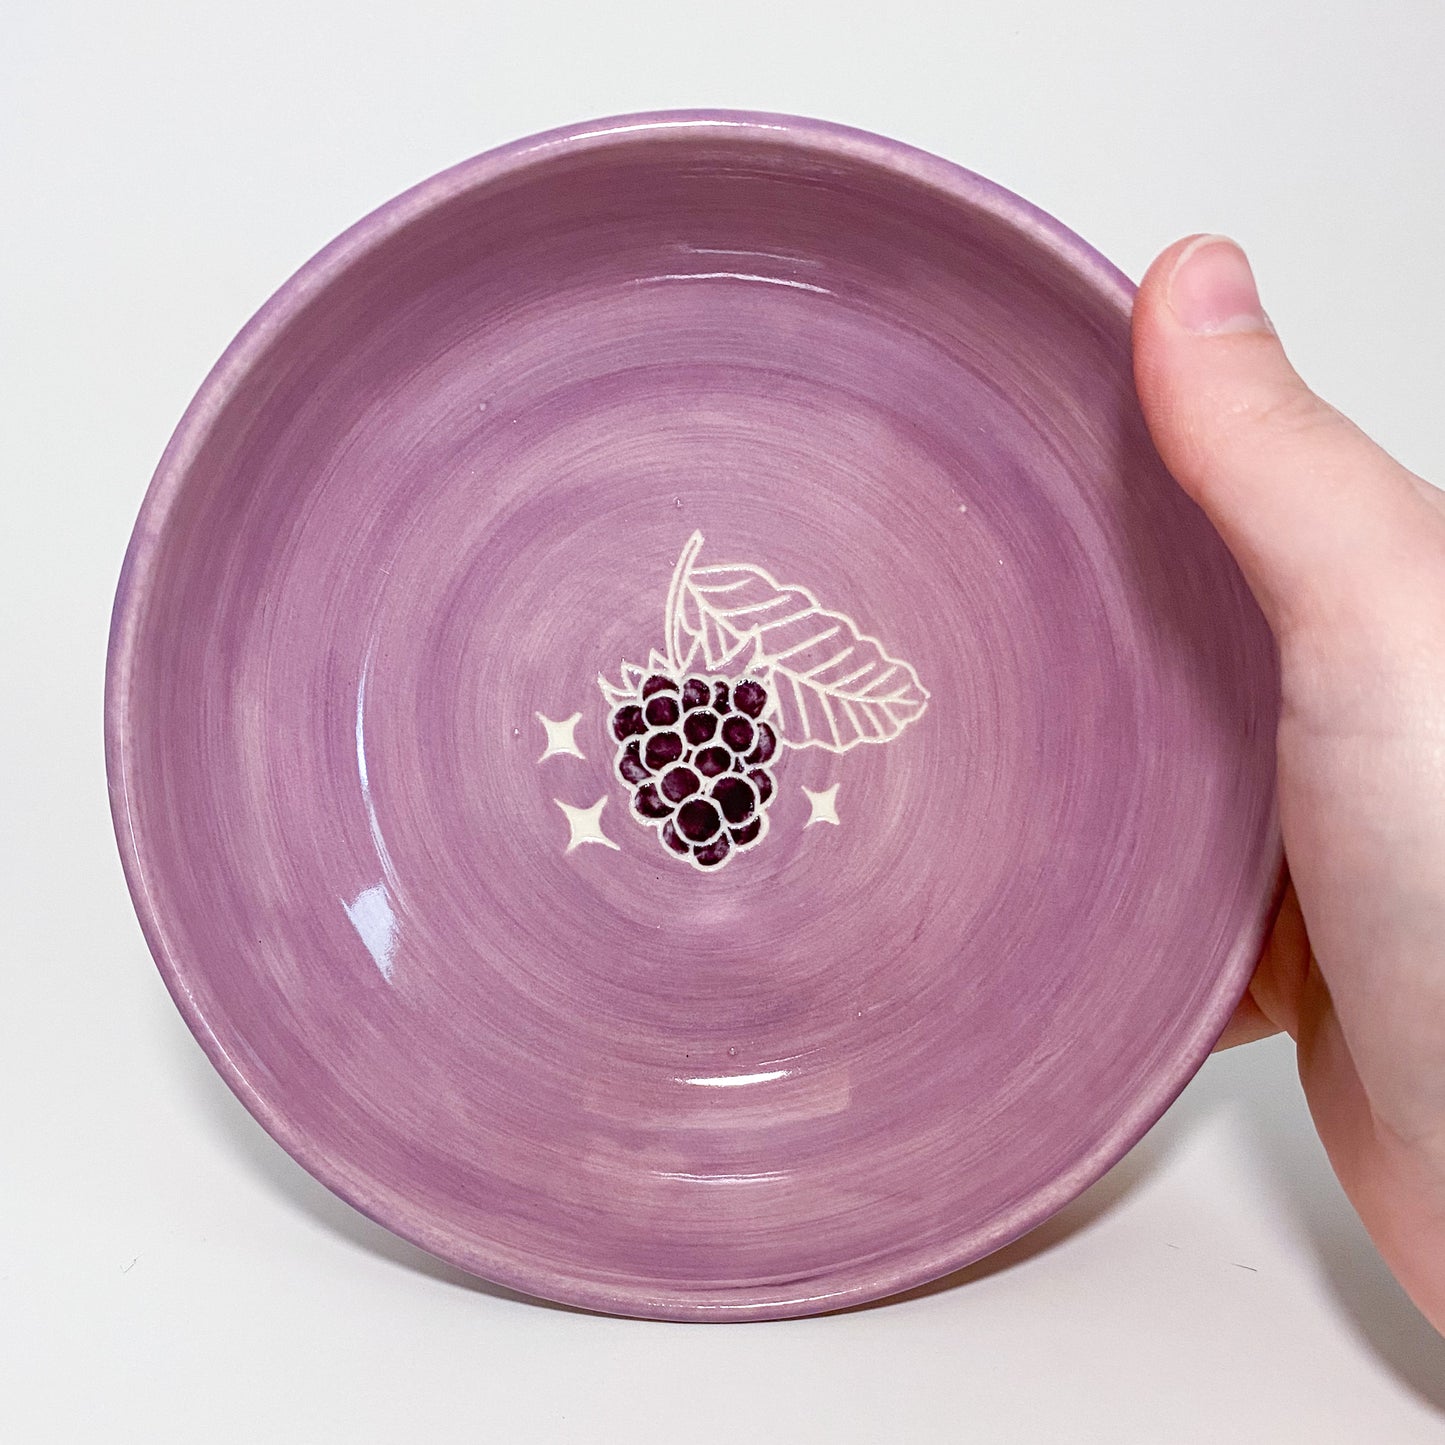 Berry Bowls - Made to Order (read description)